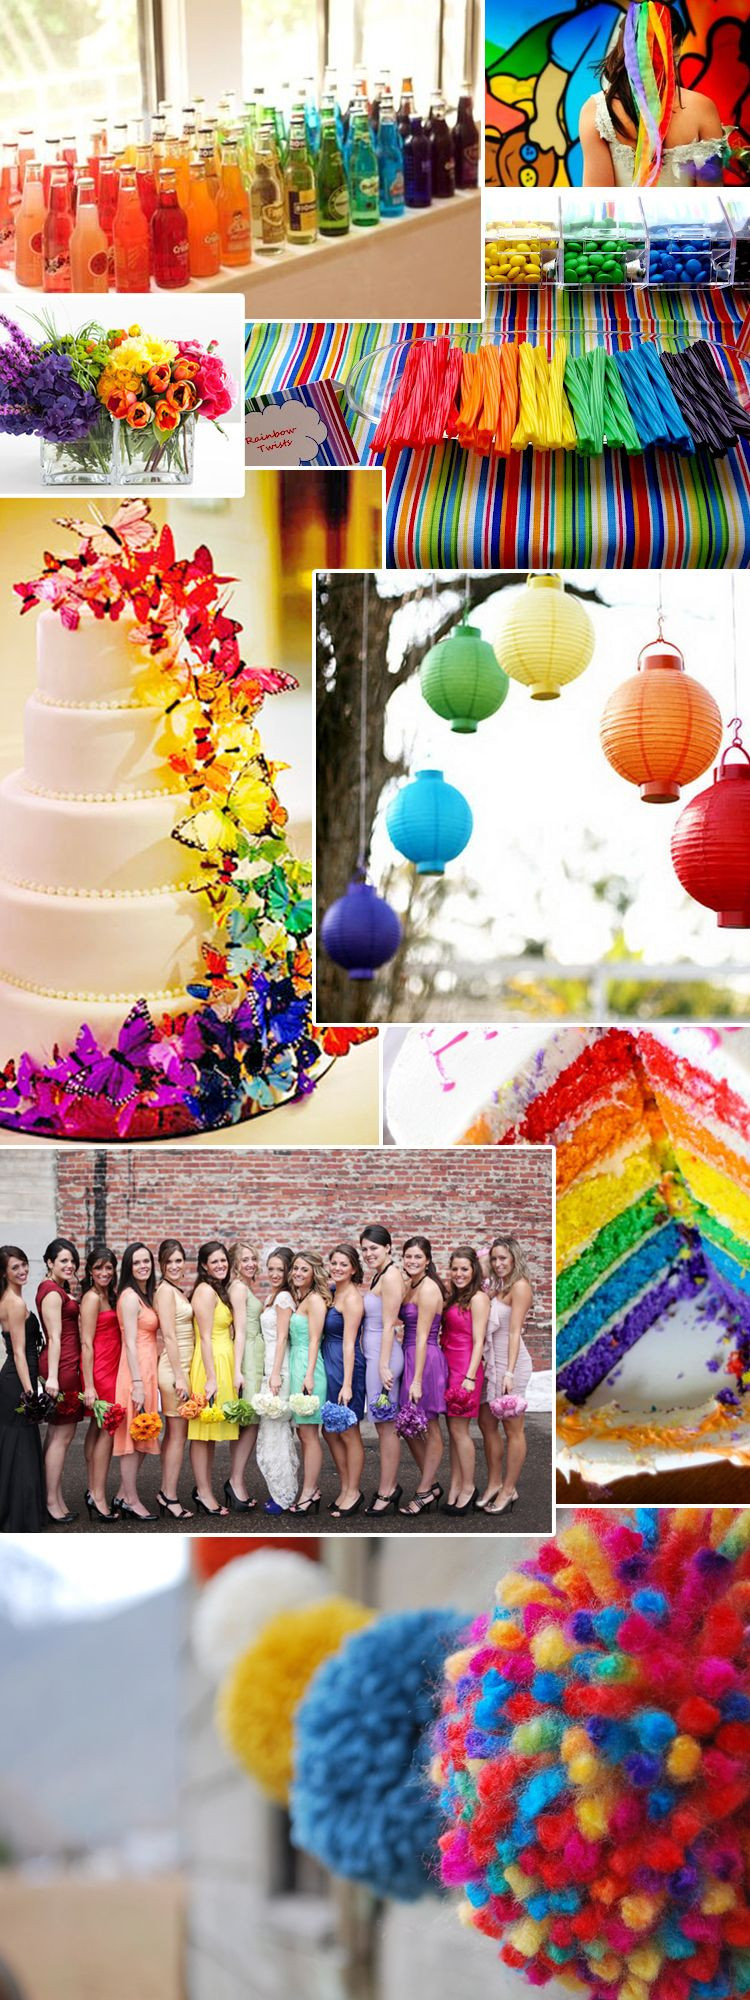 Rainbow Wedding Decorations
 multicolored event decor what do you think of this trend